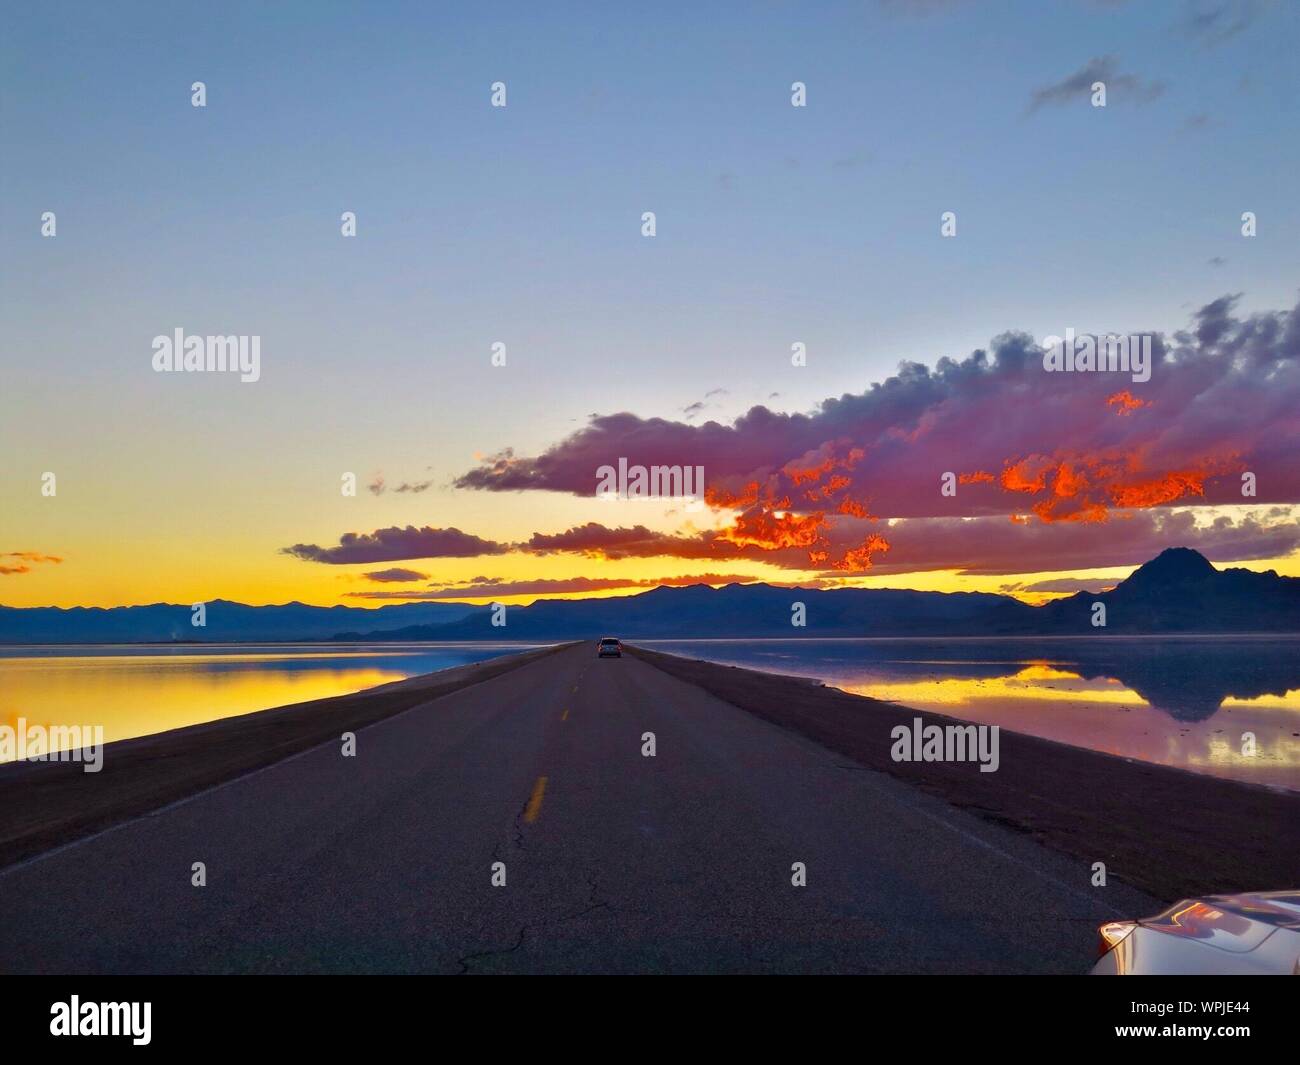 Empty Road Amidst Salt Flats Against Cloudy Sky During Sunset Stock Photo